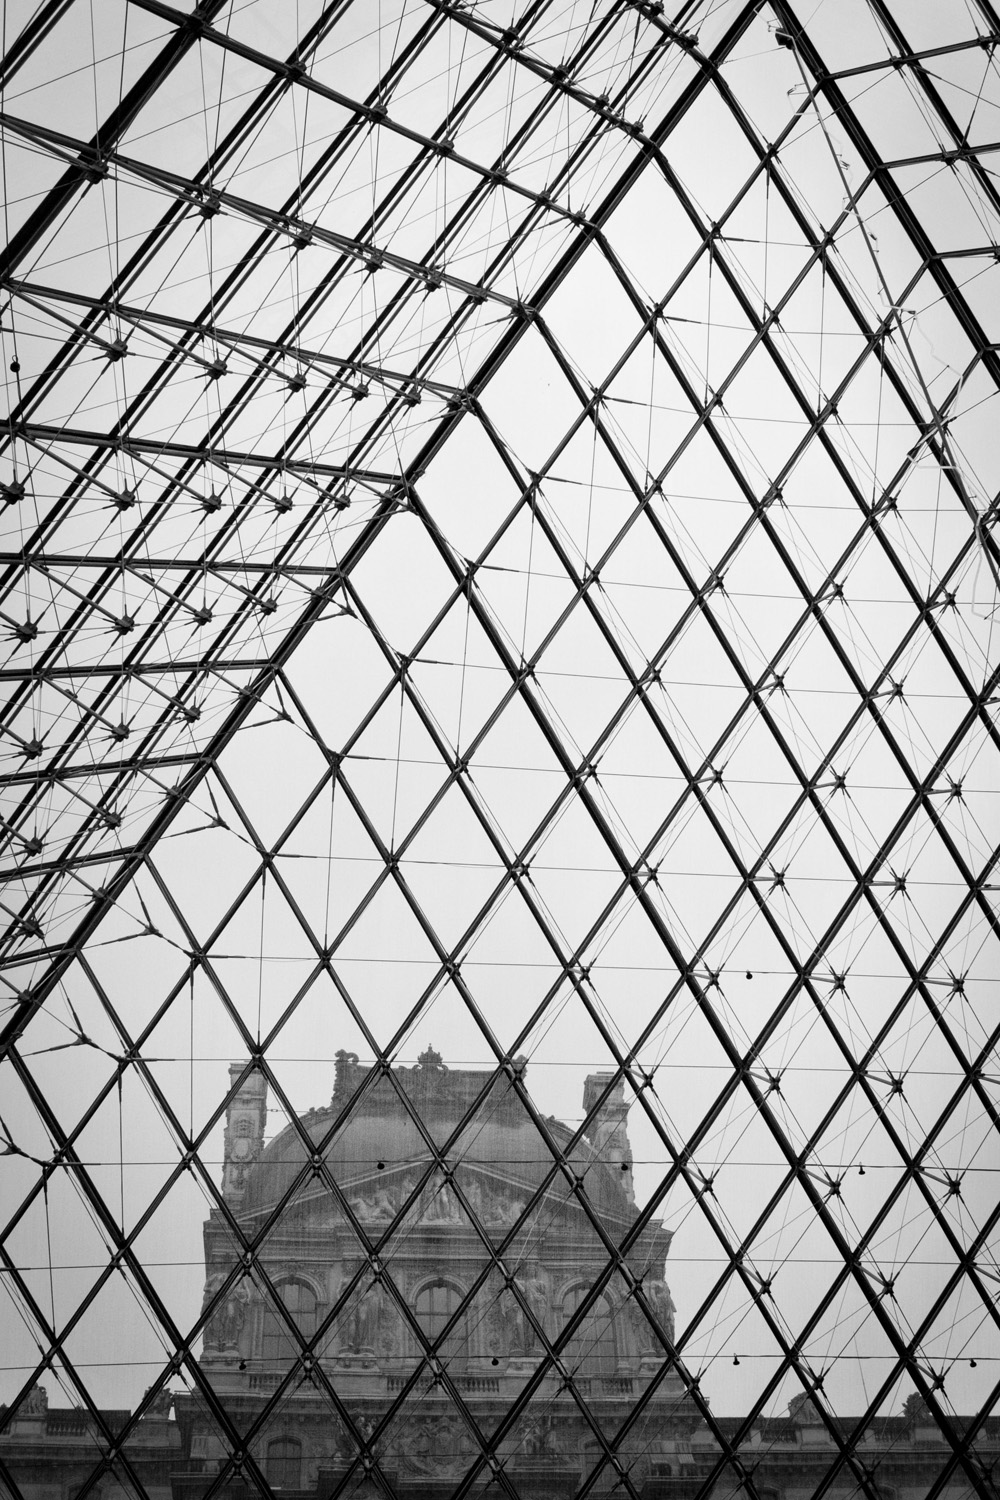 Looking up through the pyramid | Louvre, Paris, France